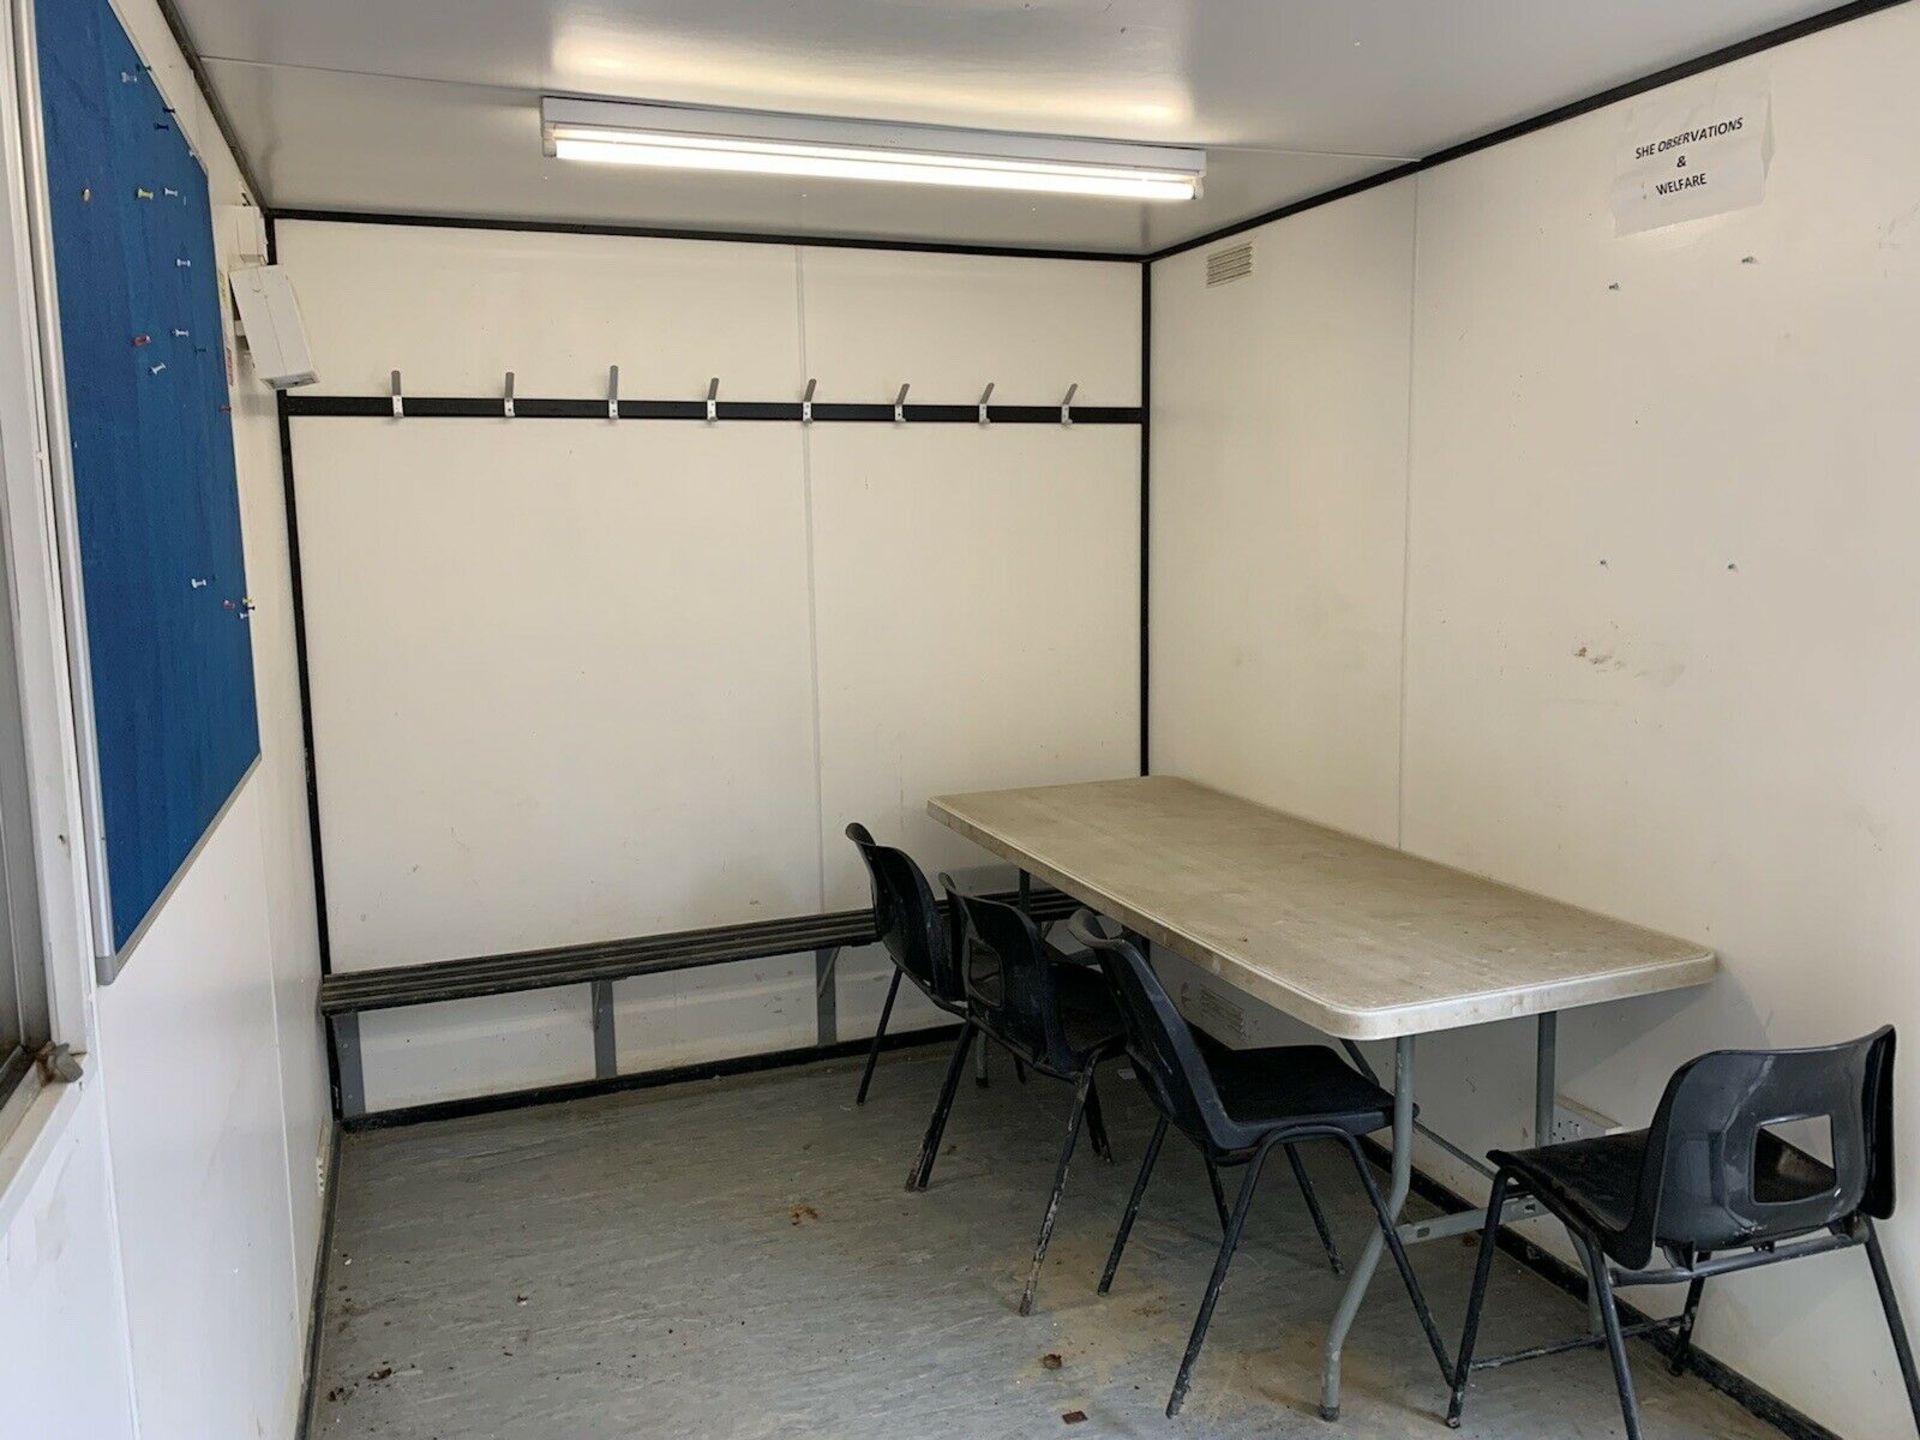 Site Welfare Unit Portable Cabin Office Canteen Co - Image 6 of 9